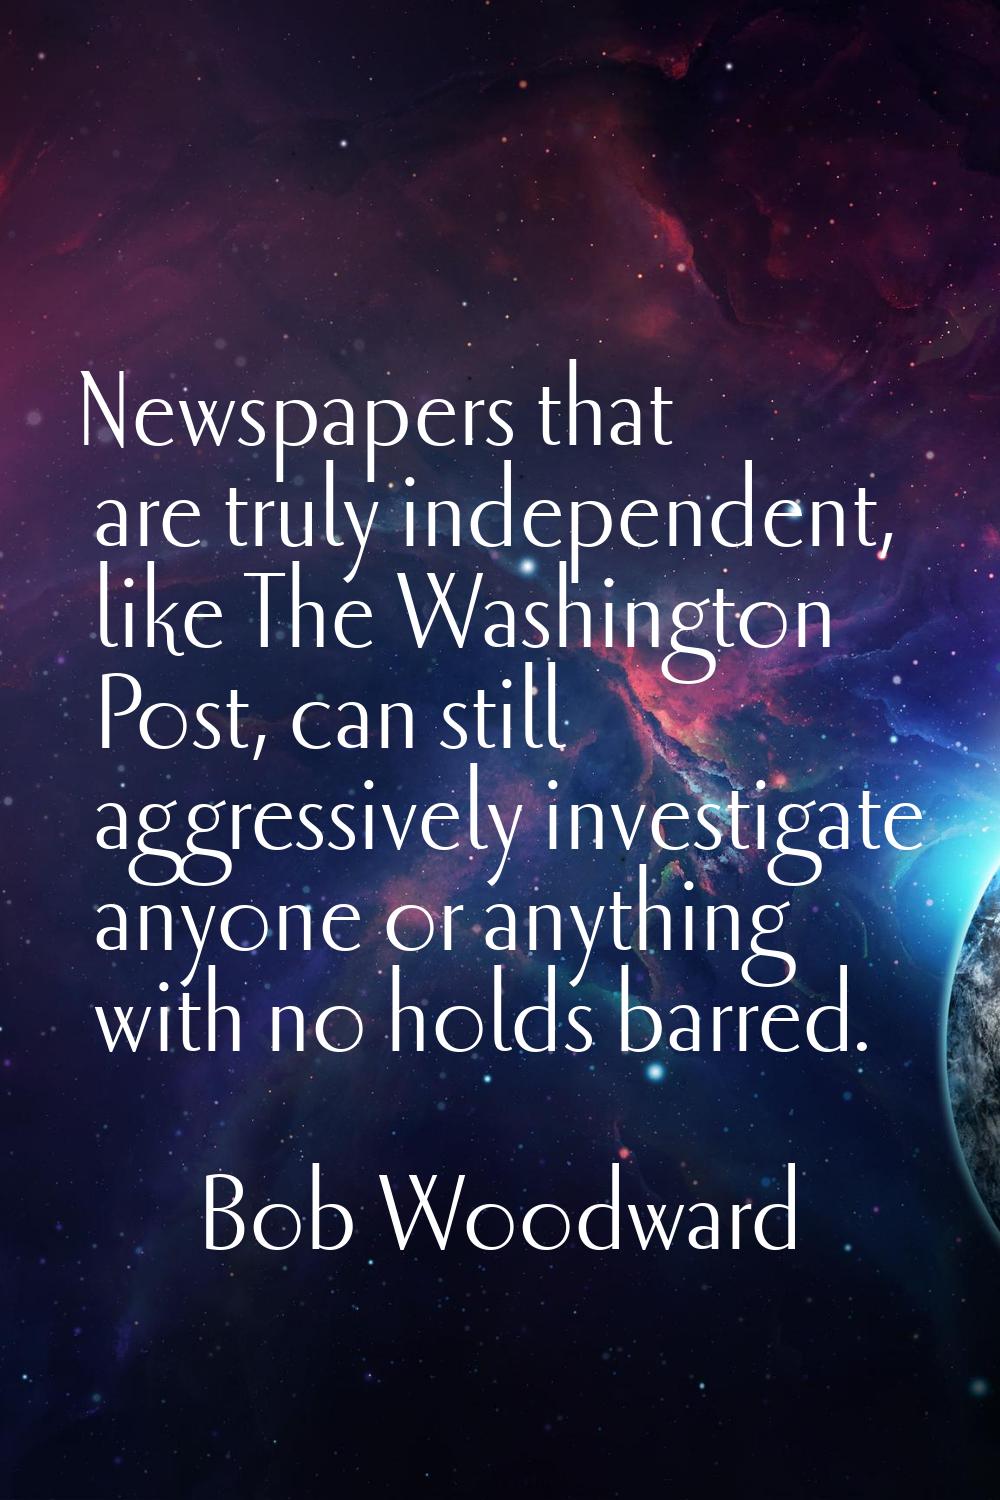 Newspapers that are truly independent, like The Washington Post, can still aggressively investigate